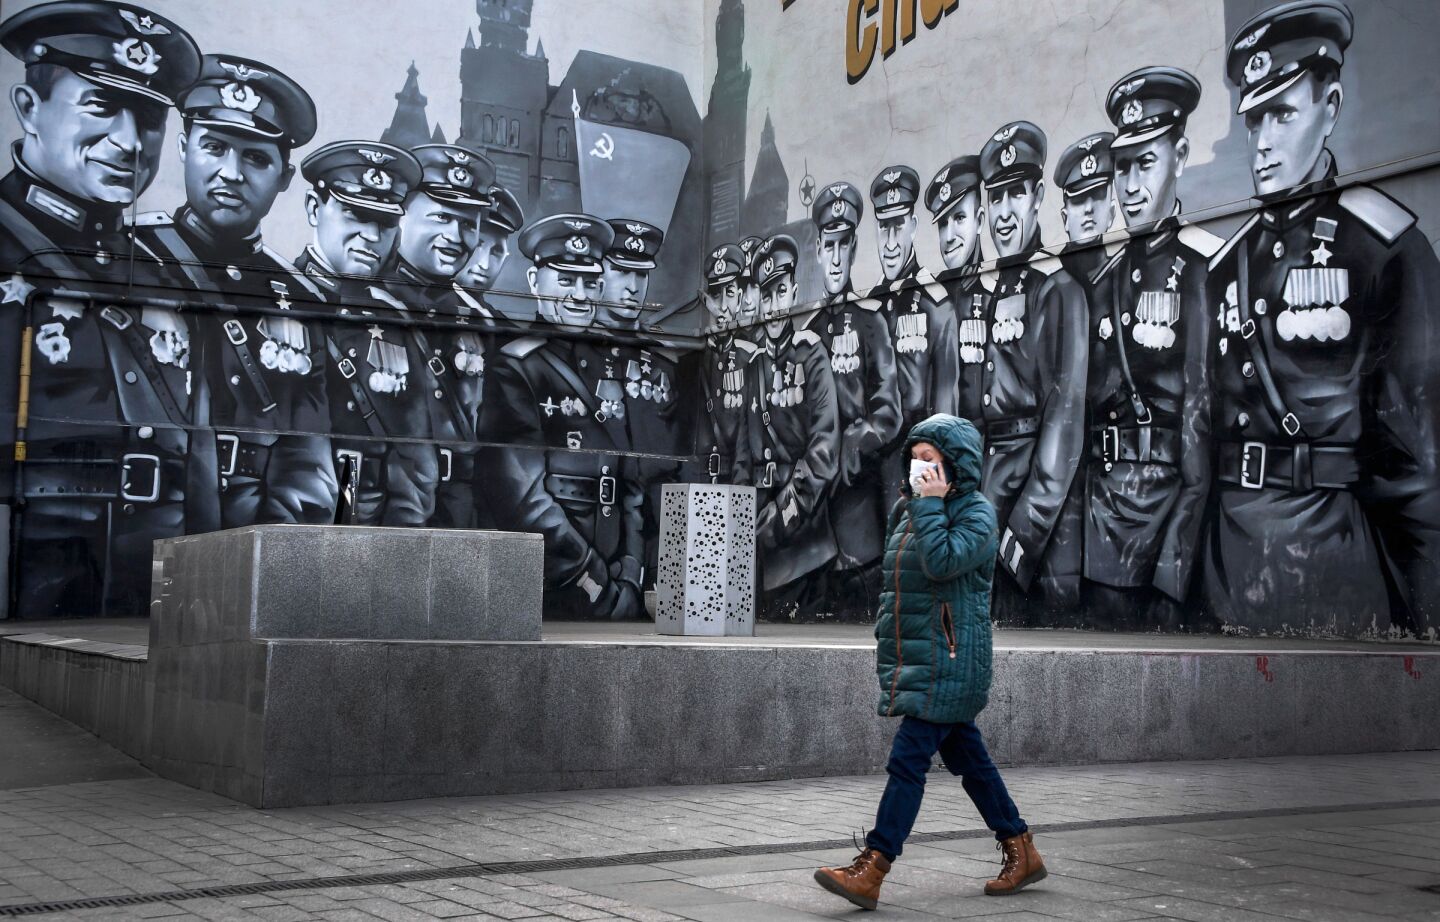 Russia: A woman wearing a face mask amid concerns about the coronavirus, walks past graffiti depicting Soviets in World War II.